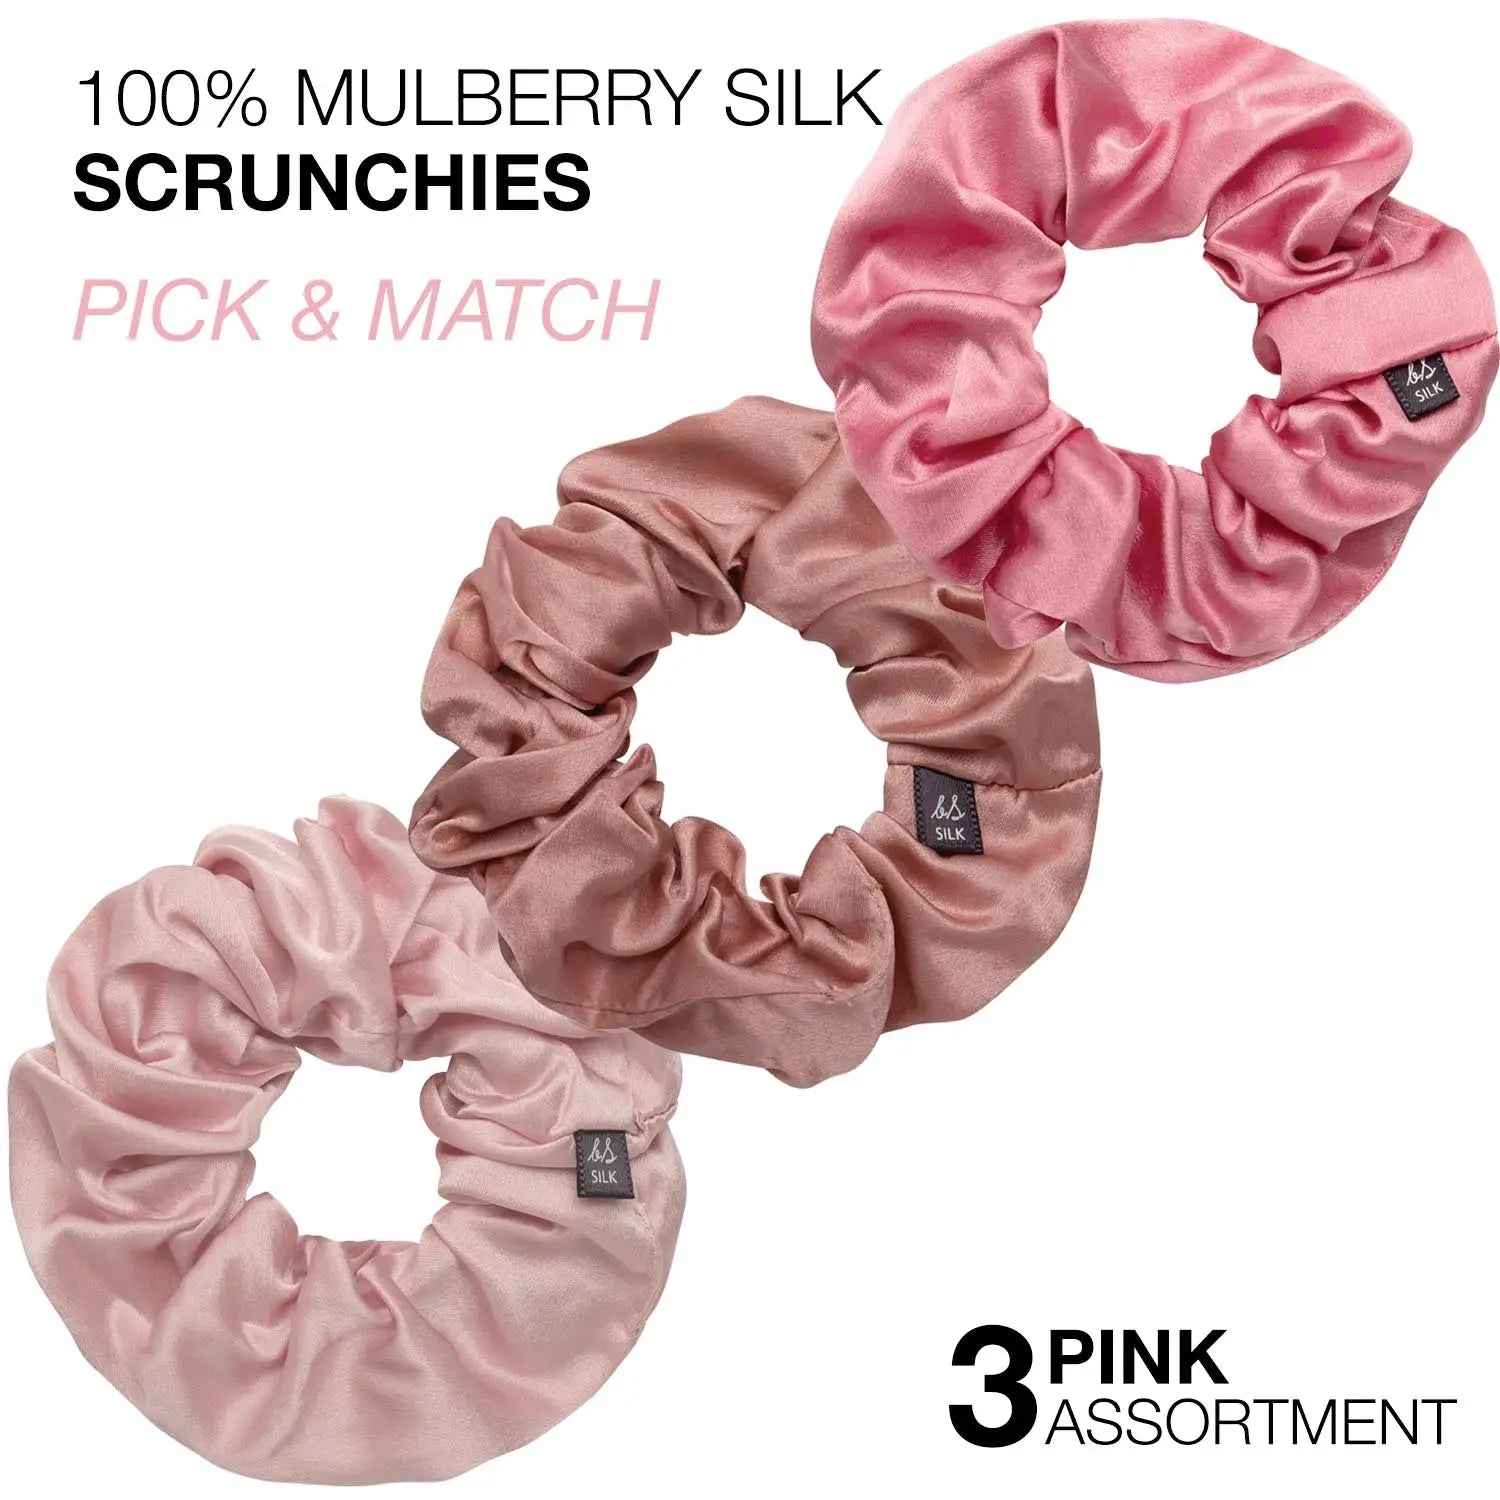 Mulberry Silk Hair Scrunchies: Large 3-Piece Set with Black Label